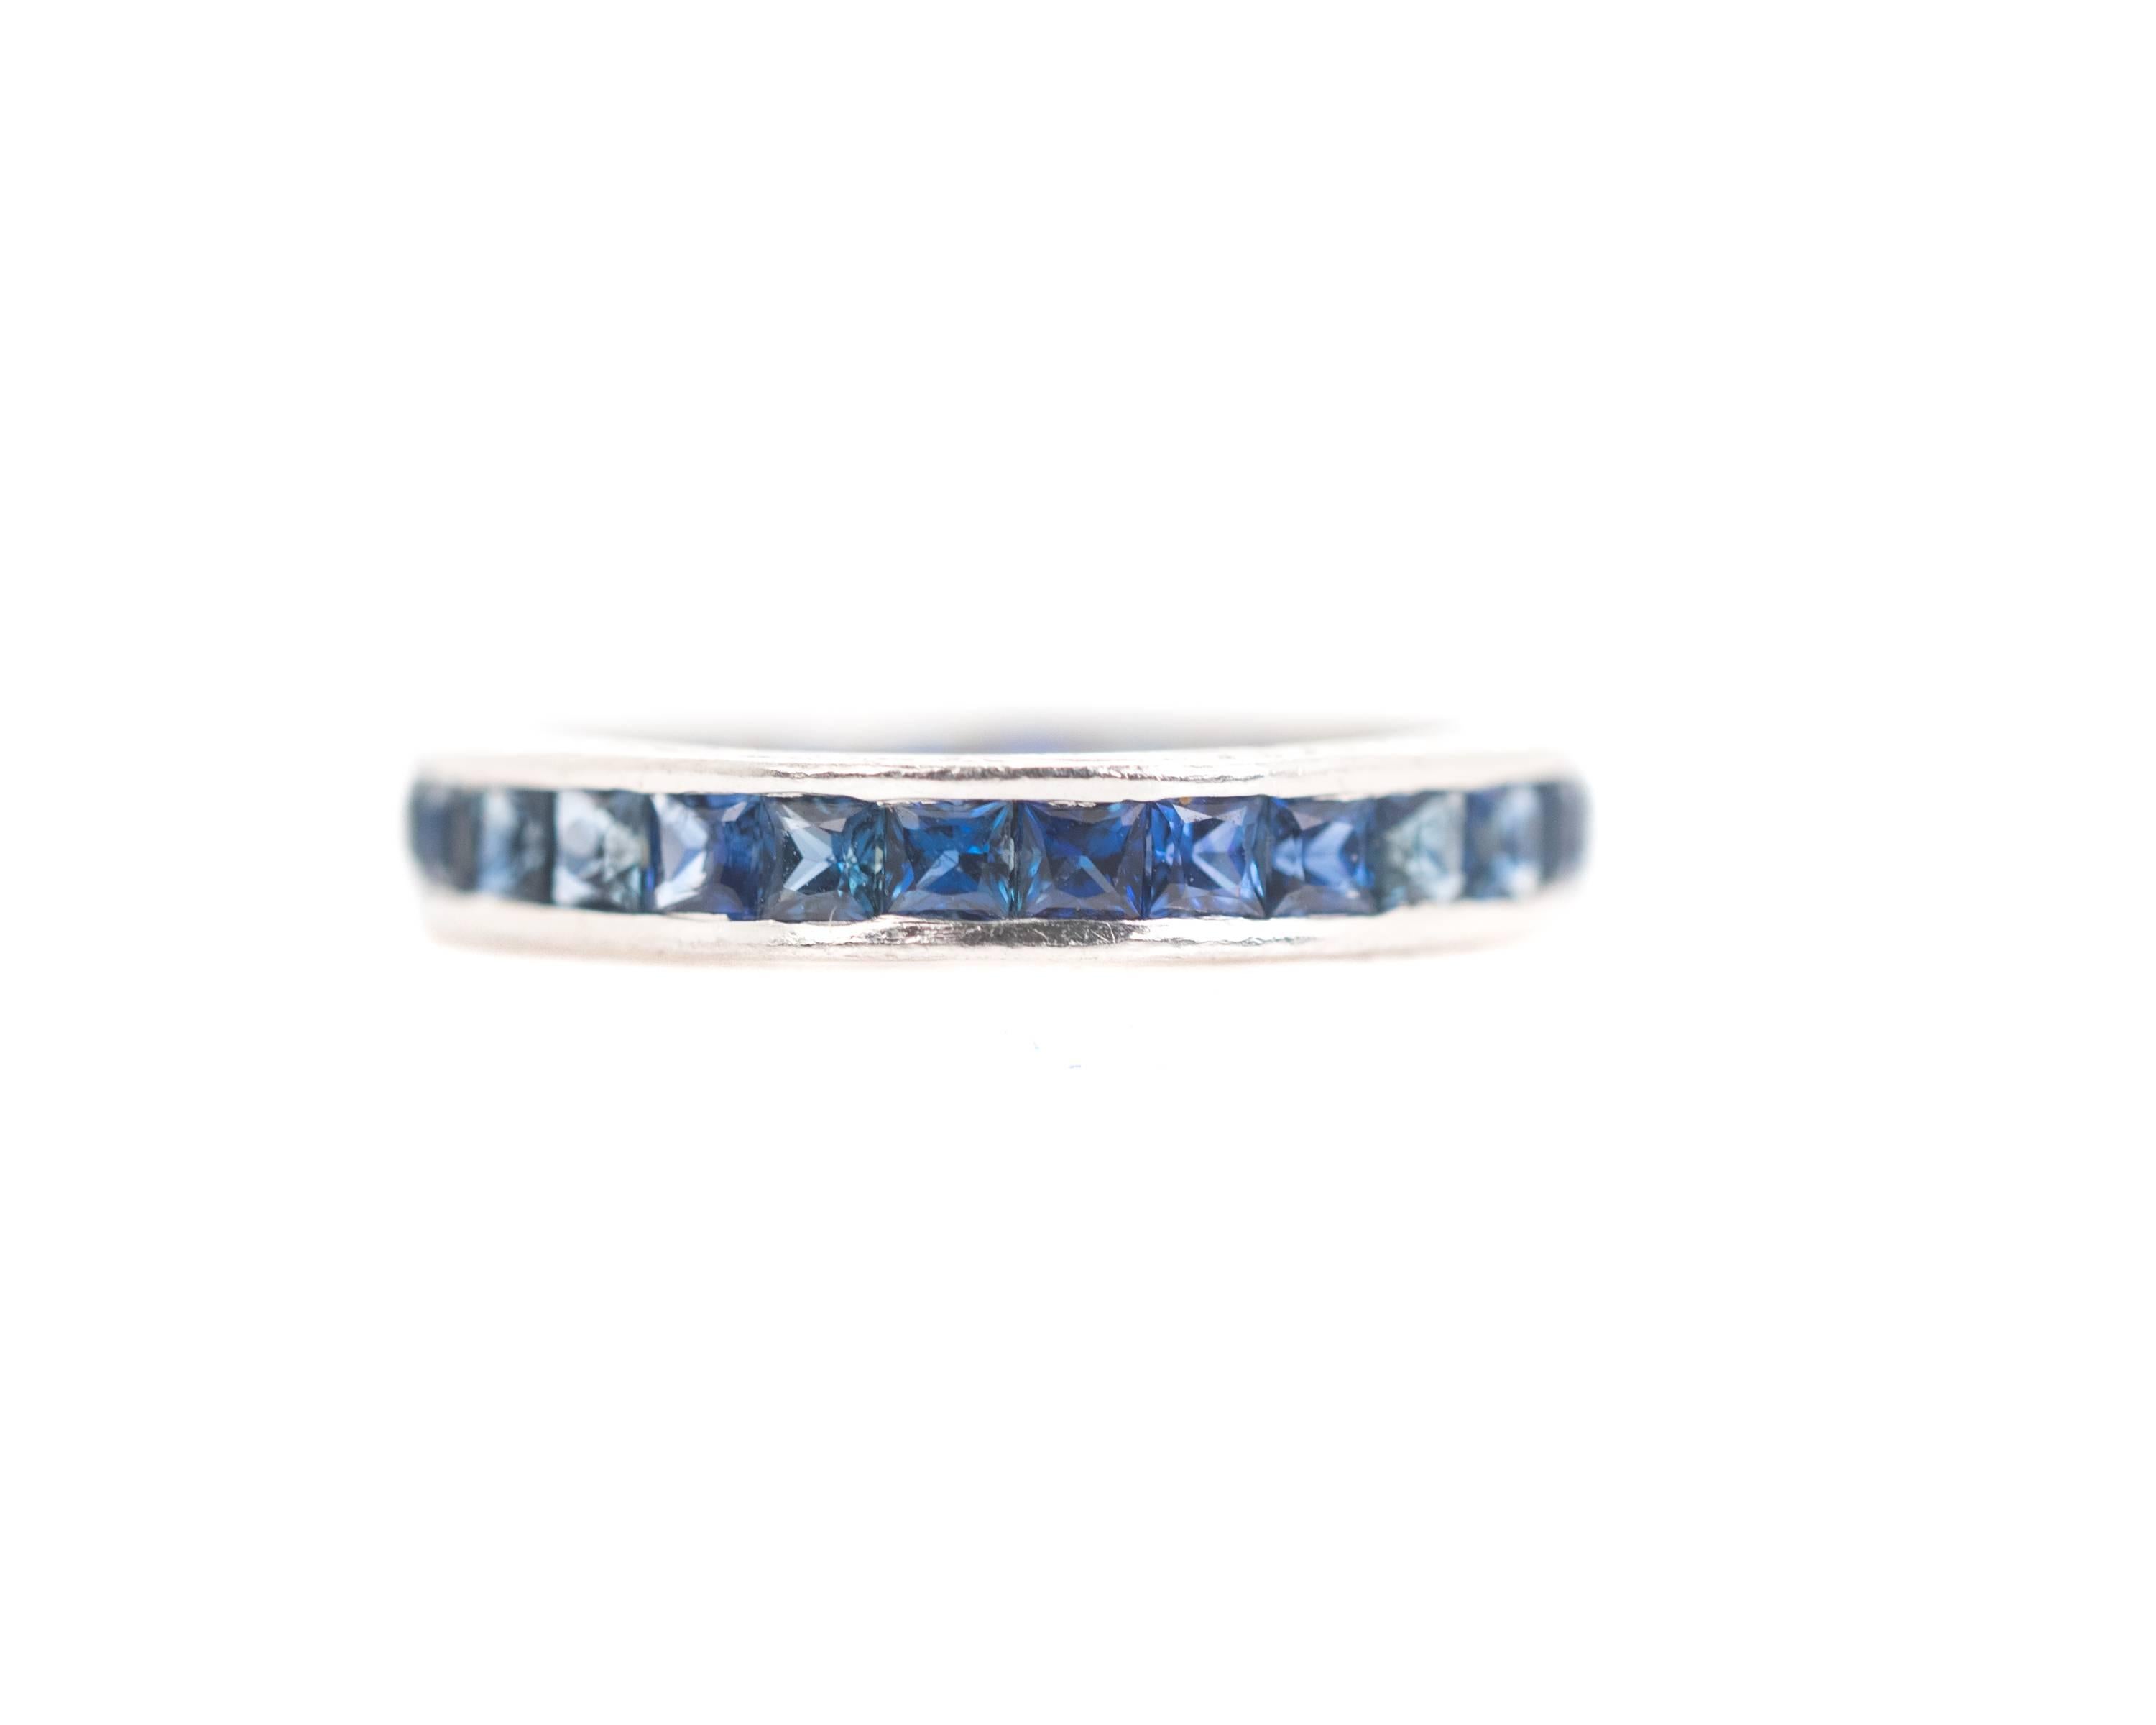 1940s Retro Sapphire & Platinum Eternity Band

Features 2.0 carats of square French cut Sapphires. The upper and lower edges of the ring are hand engraved with a flowing scrollwork design. The face of the ring sparkles with channel set, square